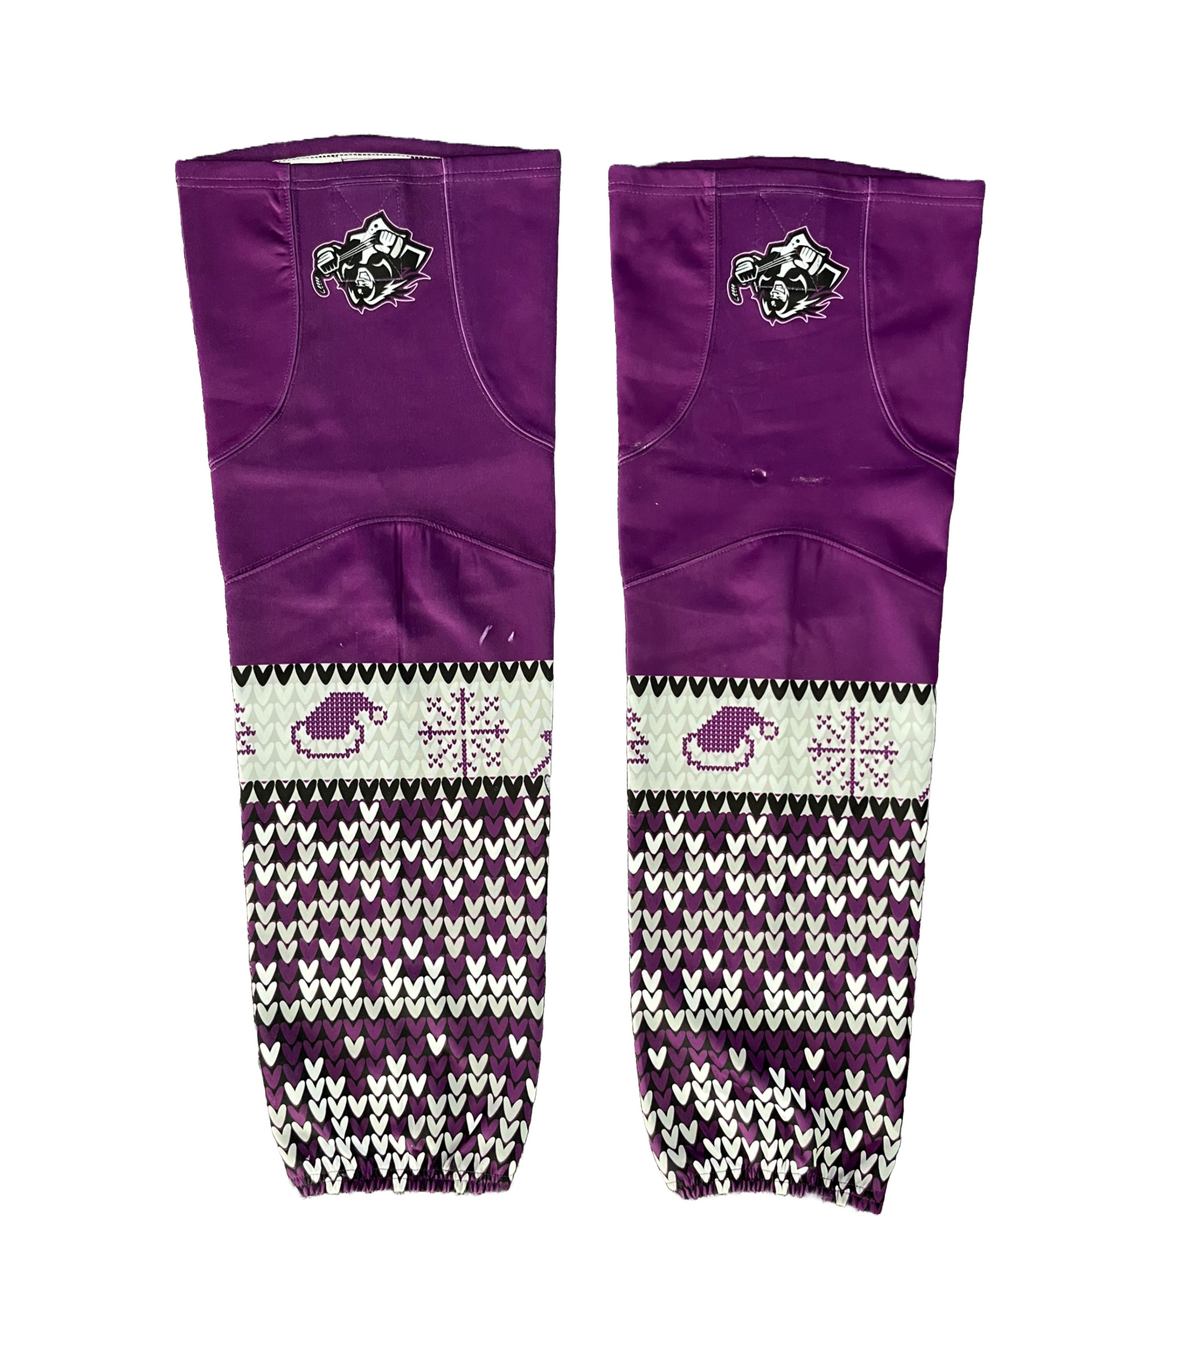 "Ugly Christmas Sweater" Game Worn Specialty Socks